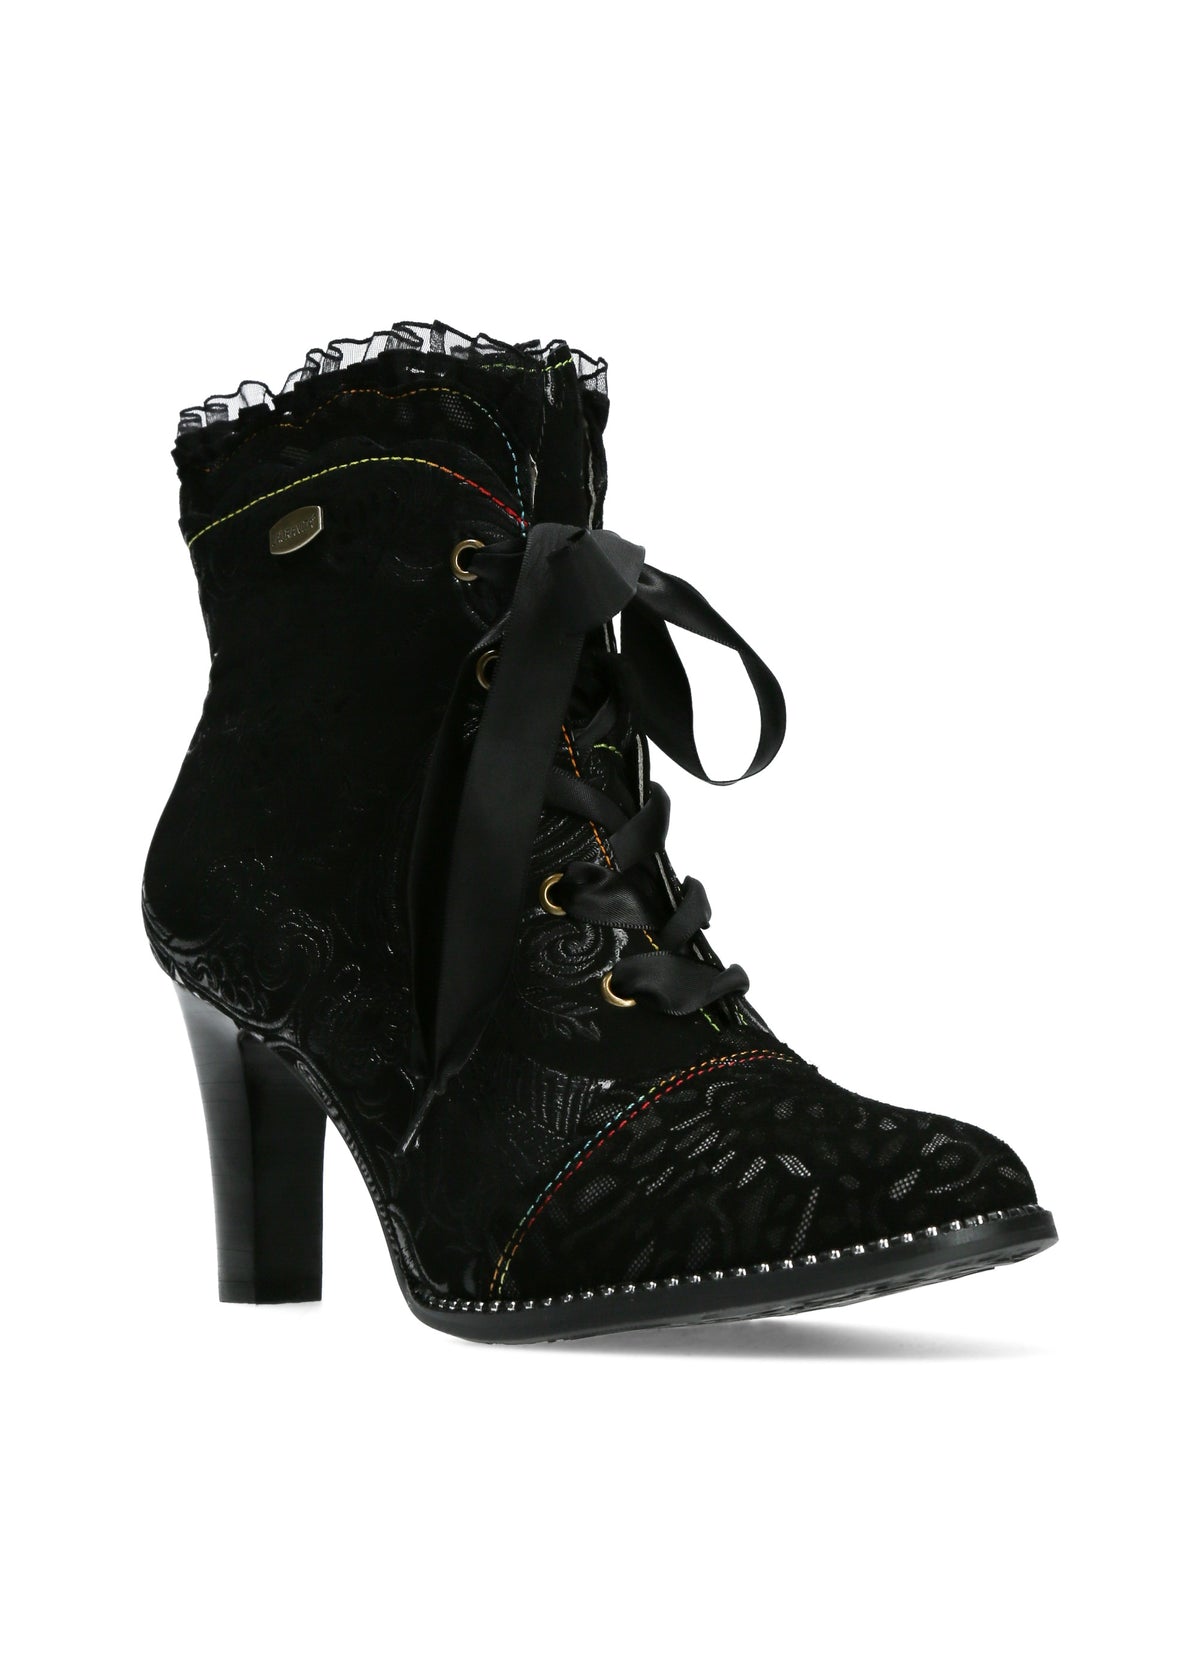 Lace-up ankle boots with high heels - black pattern